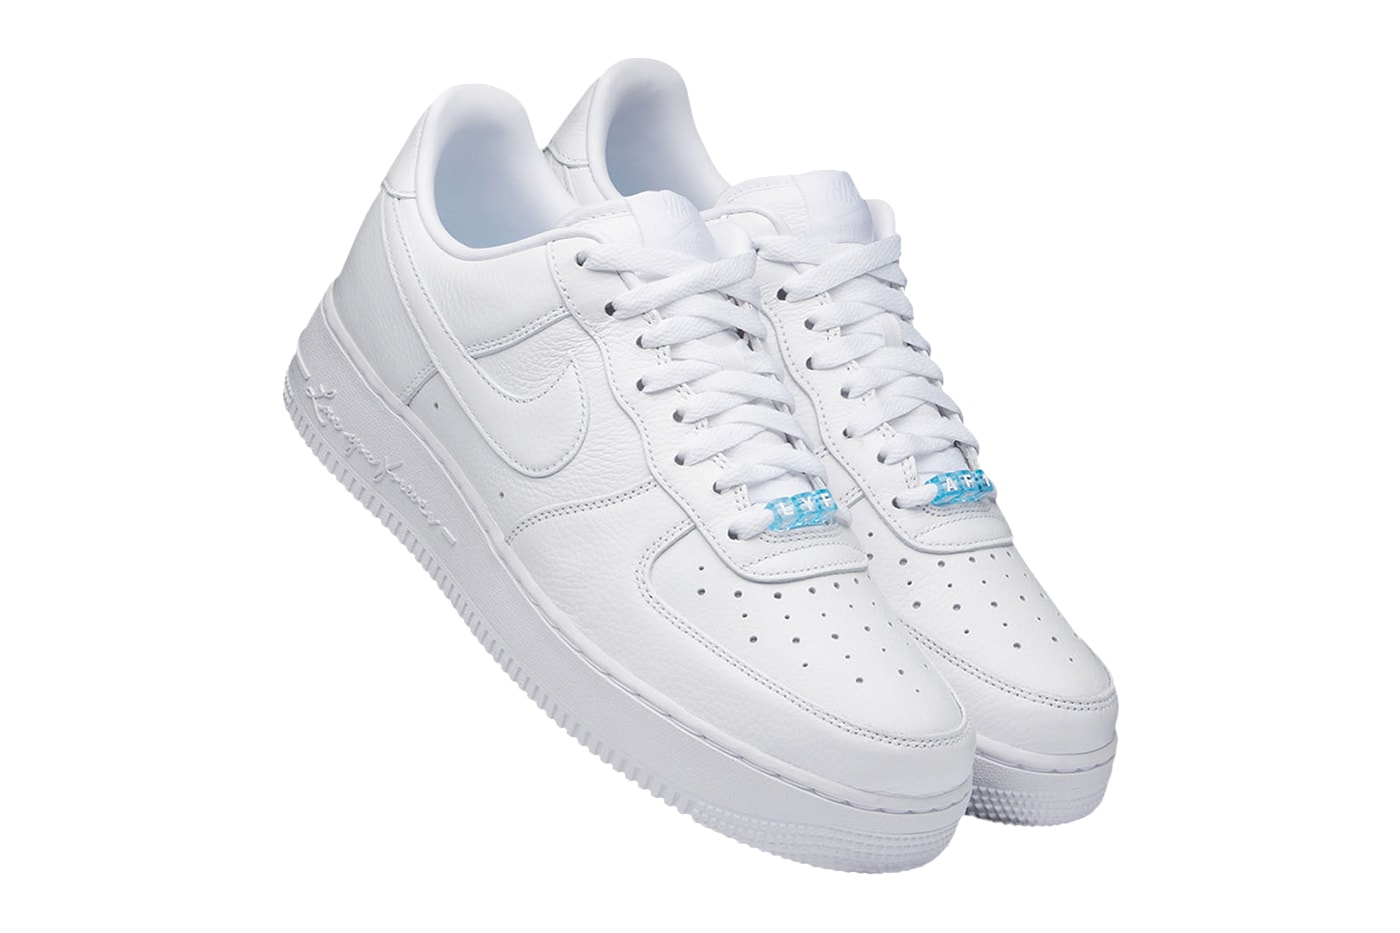 NOCTA Love You Forever Nike Air Force 1 Campaign Release Info Date Buy Price Low Drake Adonis Young Nudy Kelani Jonas Wood